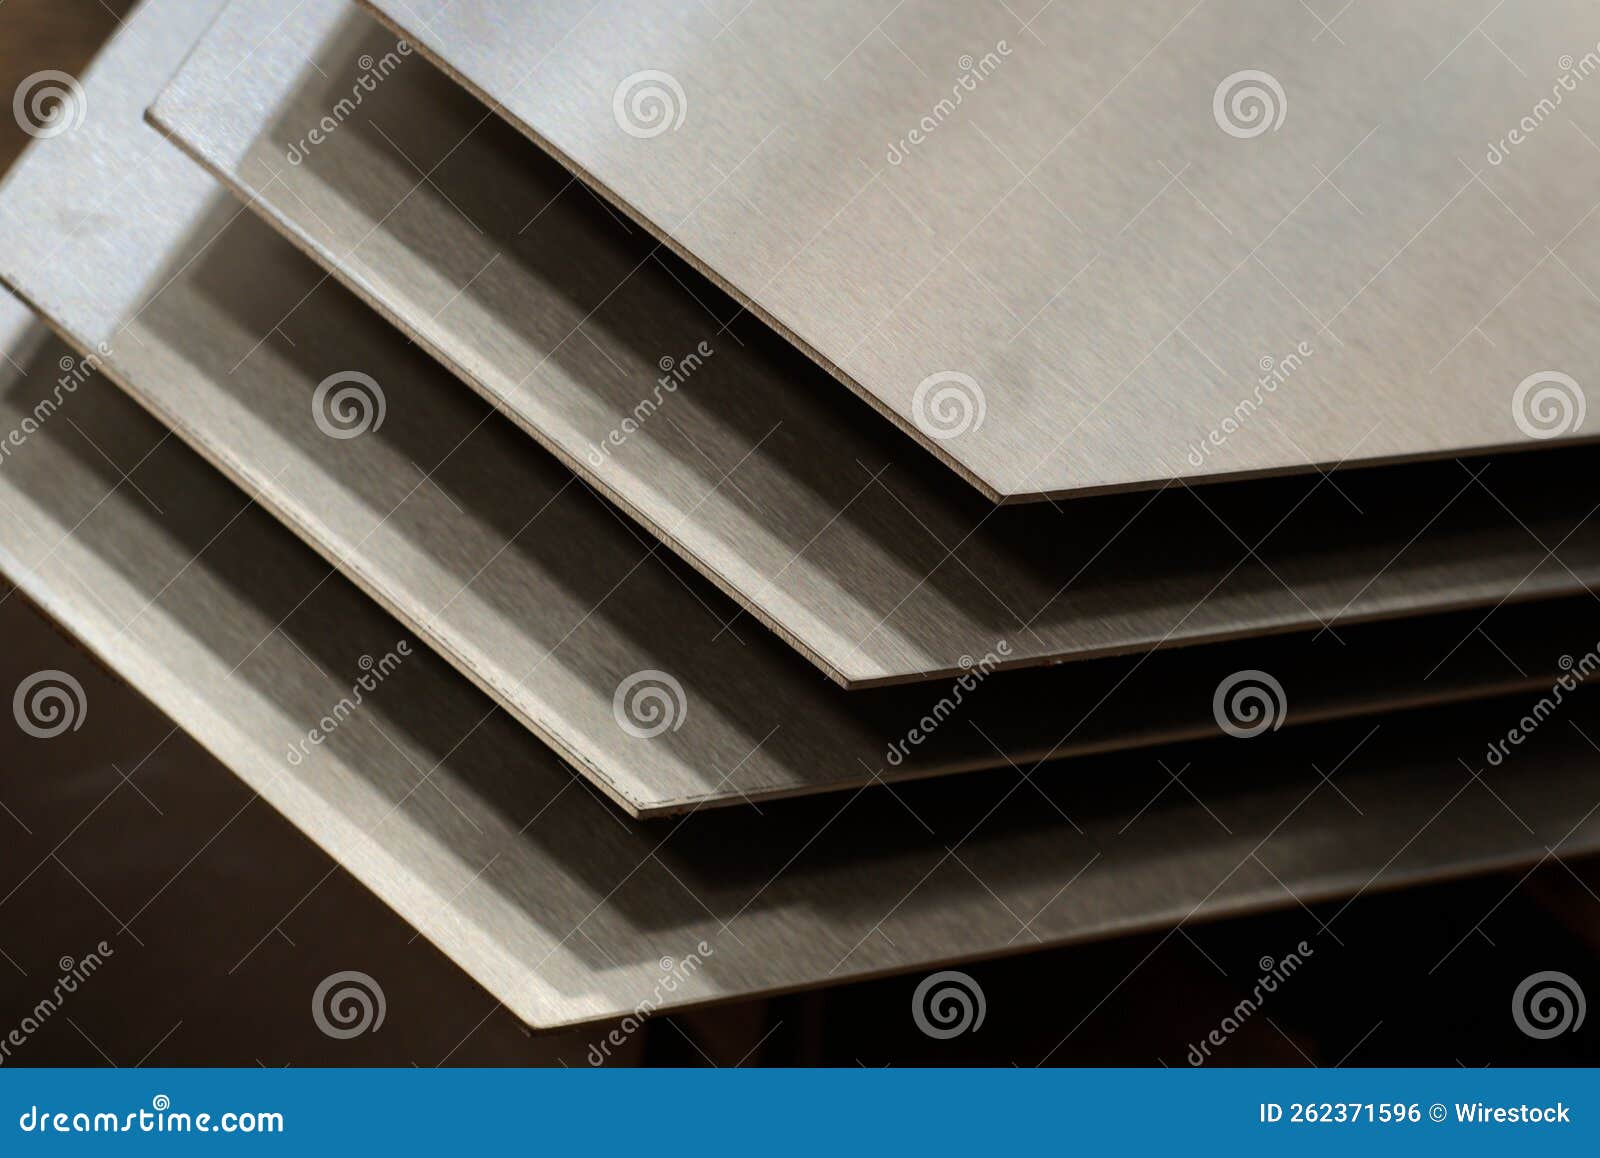 Close-up Shot of Cut Metal Shiny Silver Sheets Forming an Abstract  Geometric Design Stock Photo - Image of stack, light: 262371596